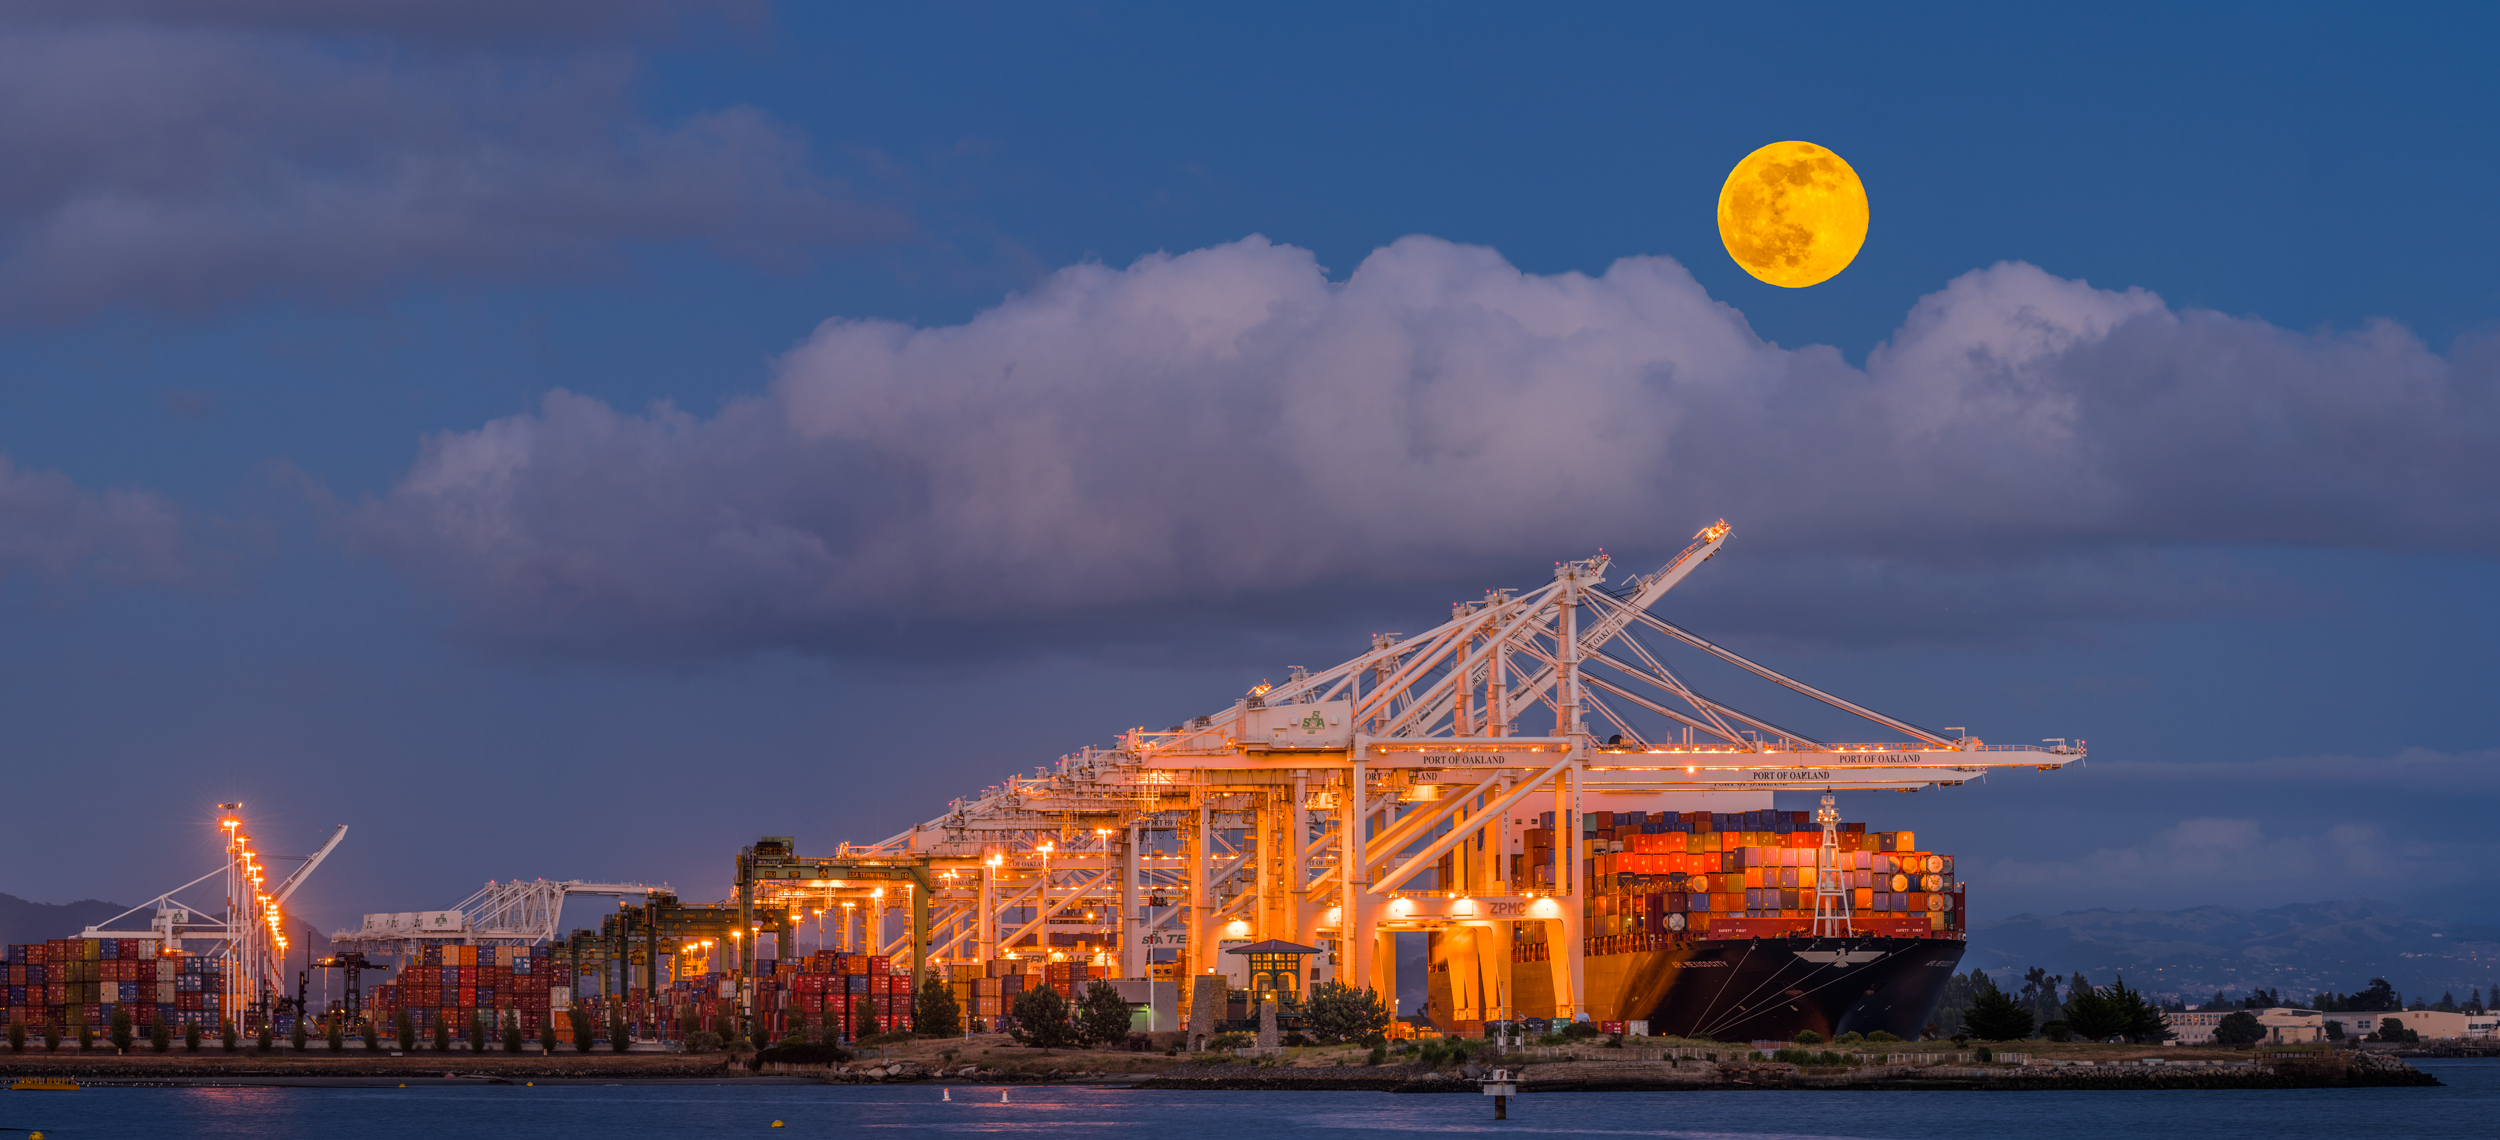 Oakland California Estuary Port of Oakland Cranes Containers Ships Full Moon Moonrise Panorama Fine Art Landscape Photography Mark Lilly